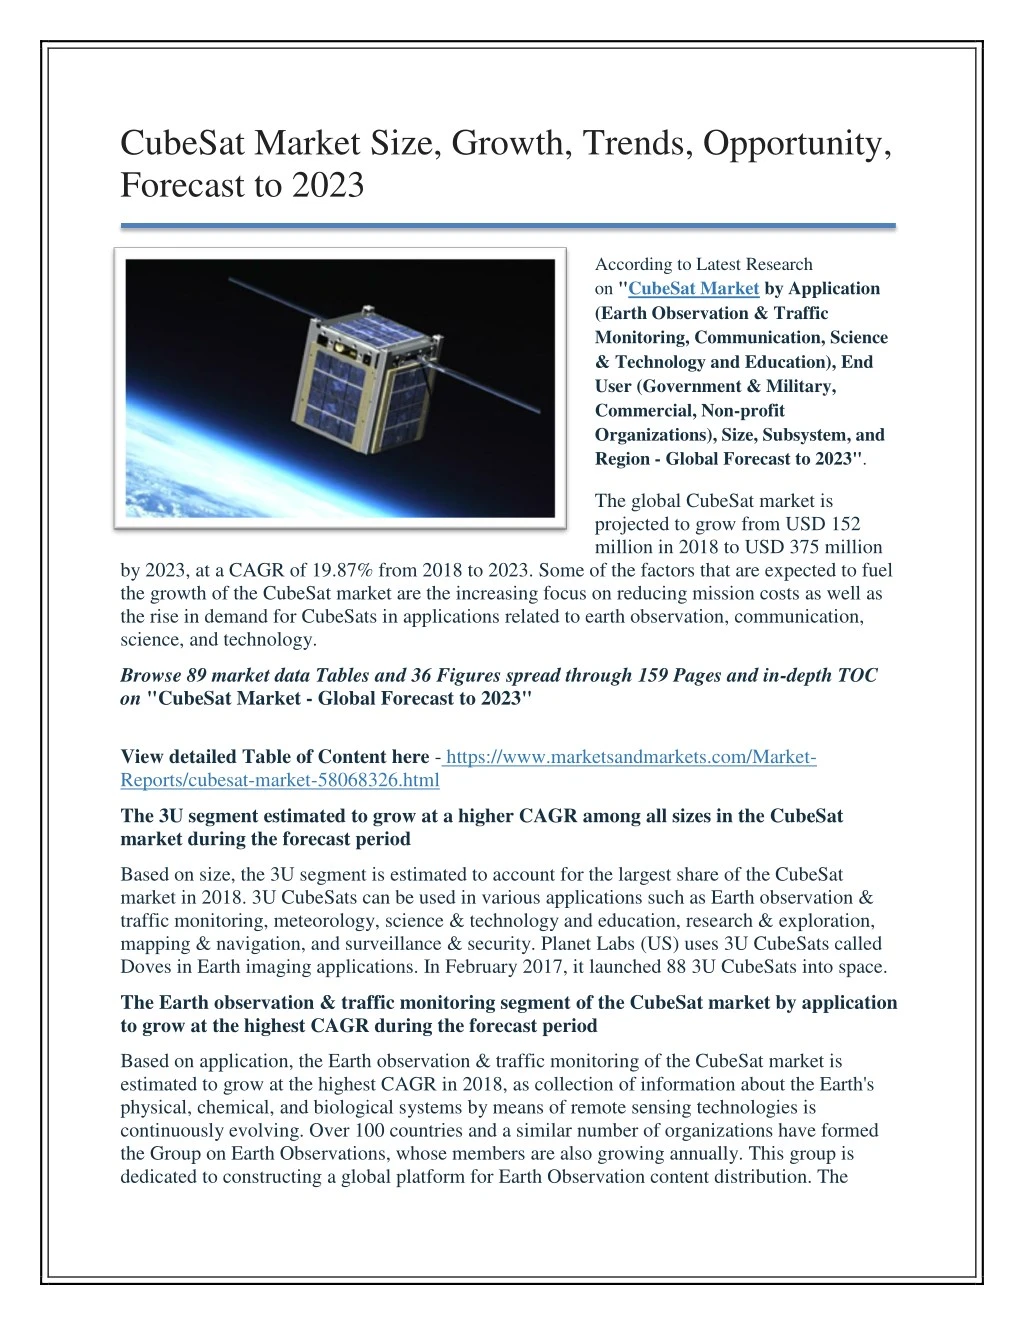 cubesat market size growth trends opportunity